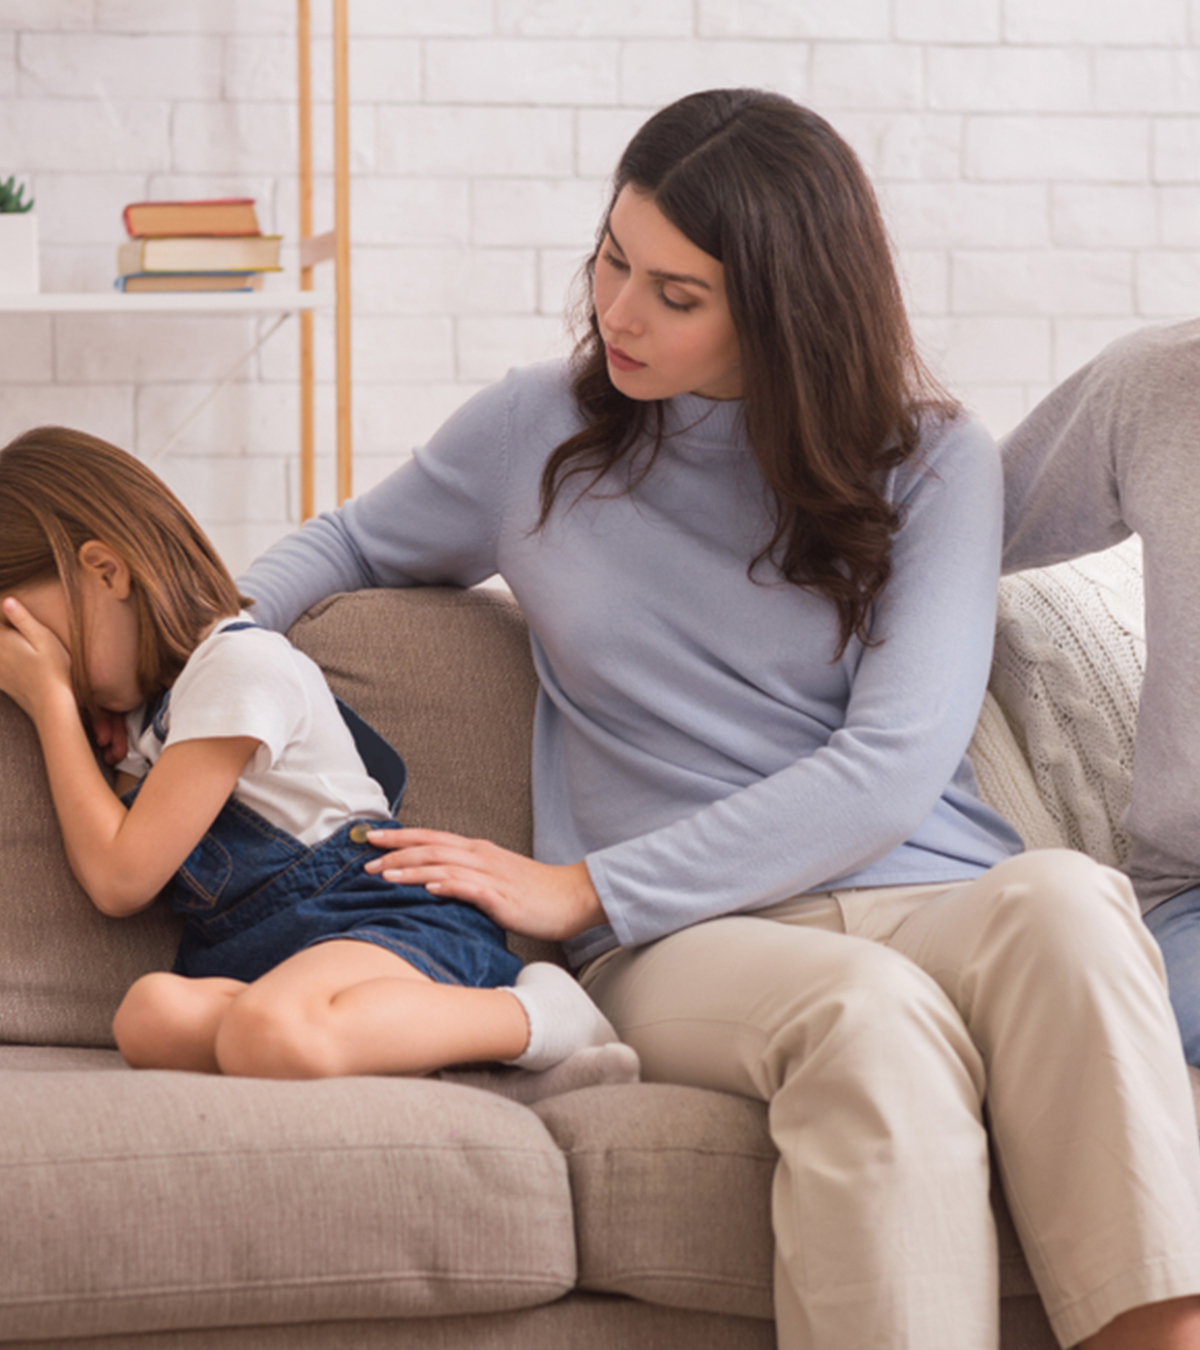 7 Psychological Problems That Arise Because Of Improper Parenting